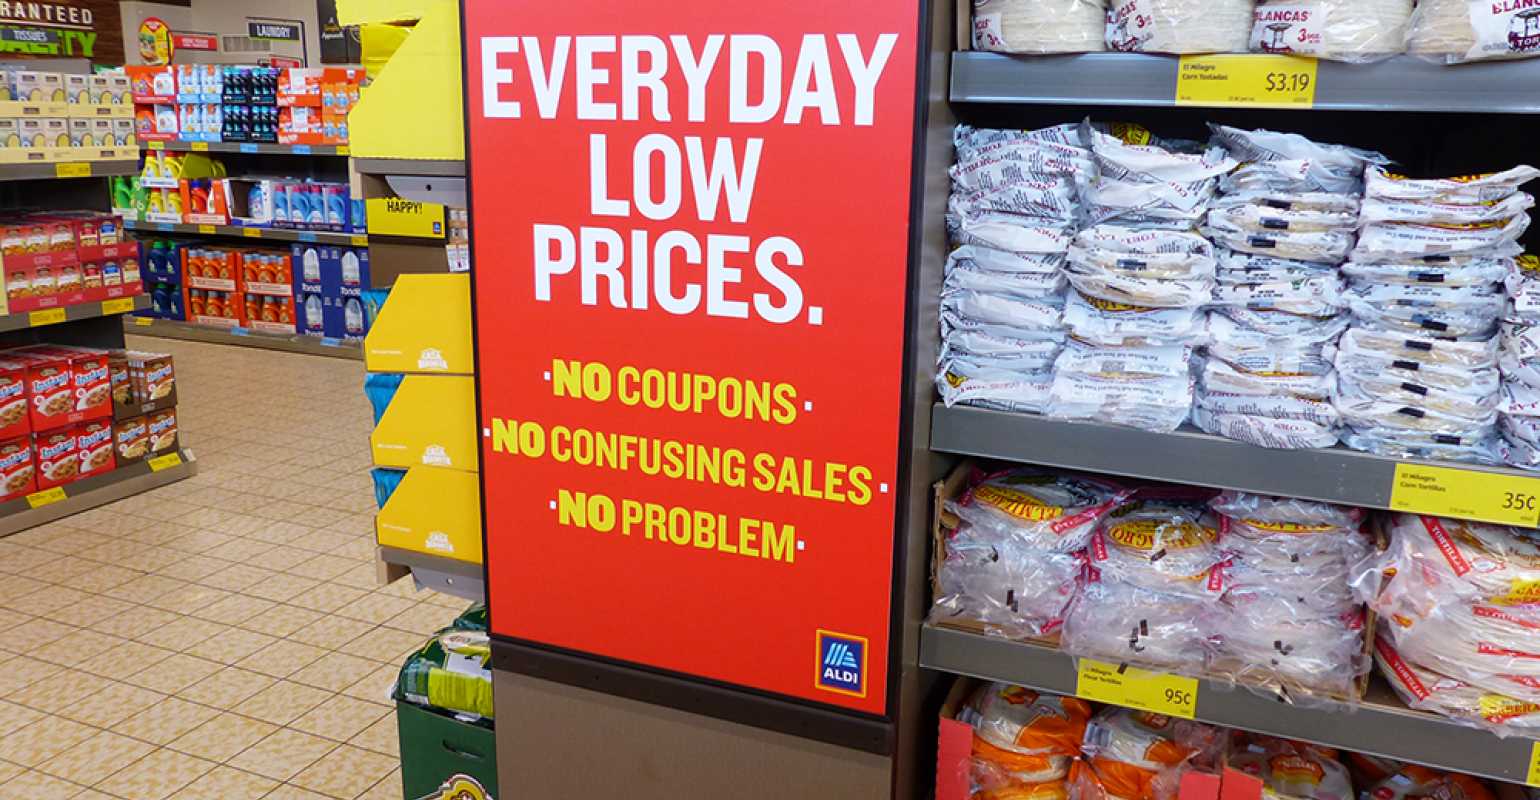 Discount Grocery Stores: Are They Worth the Savings?